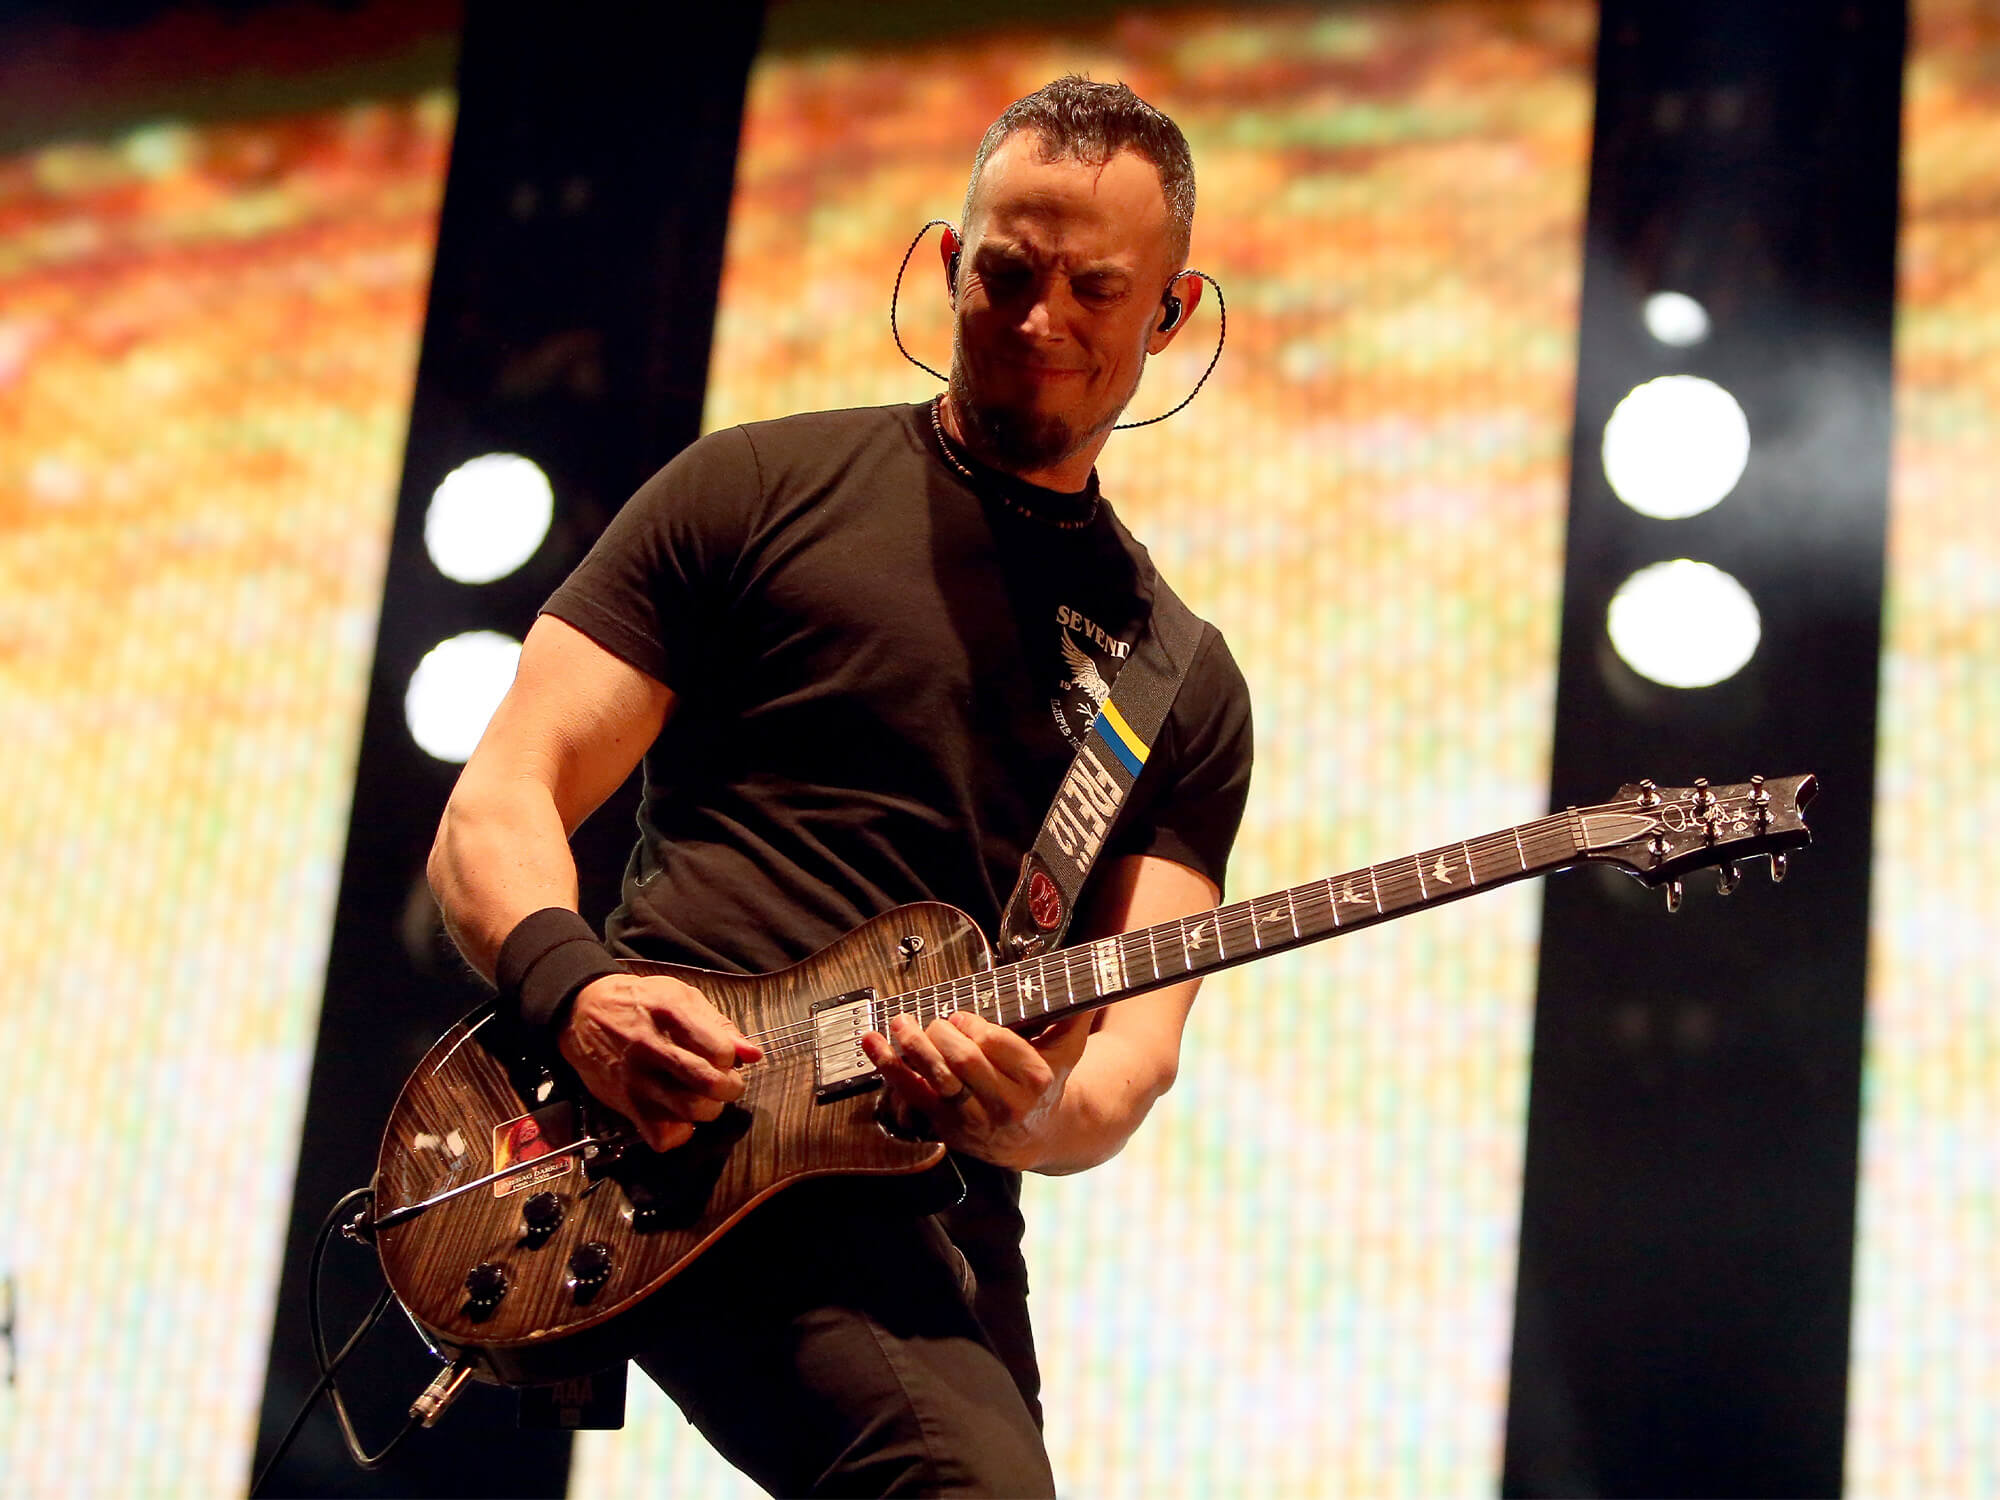 Mark Tremonti on stage playing guitar. He has a grey-coloured PRS model and is wearing all black. He is playing high up on the fretboard close to the body.